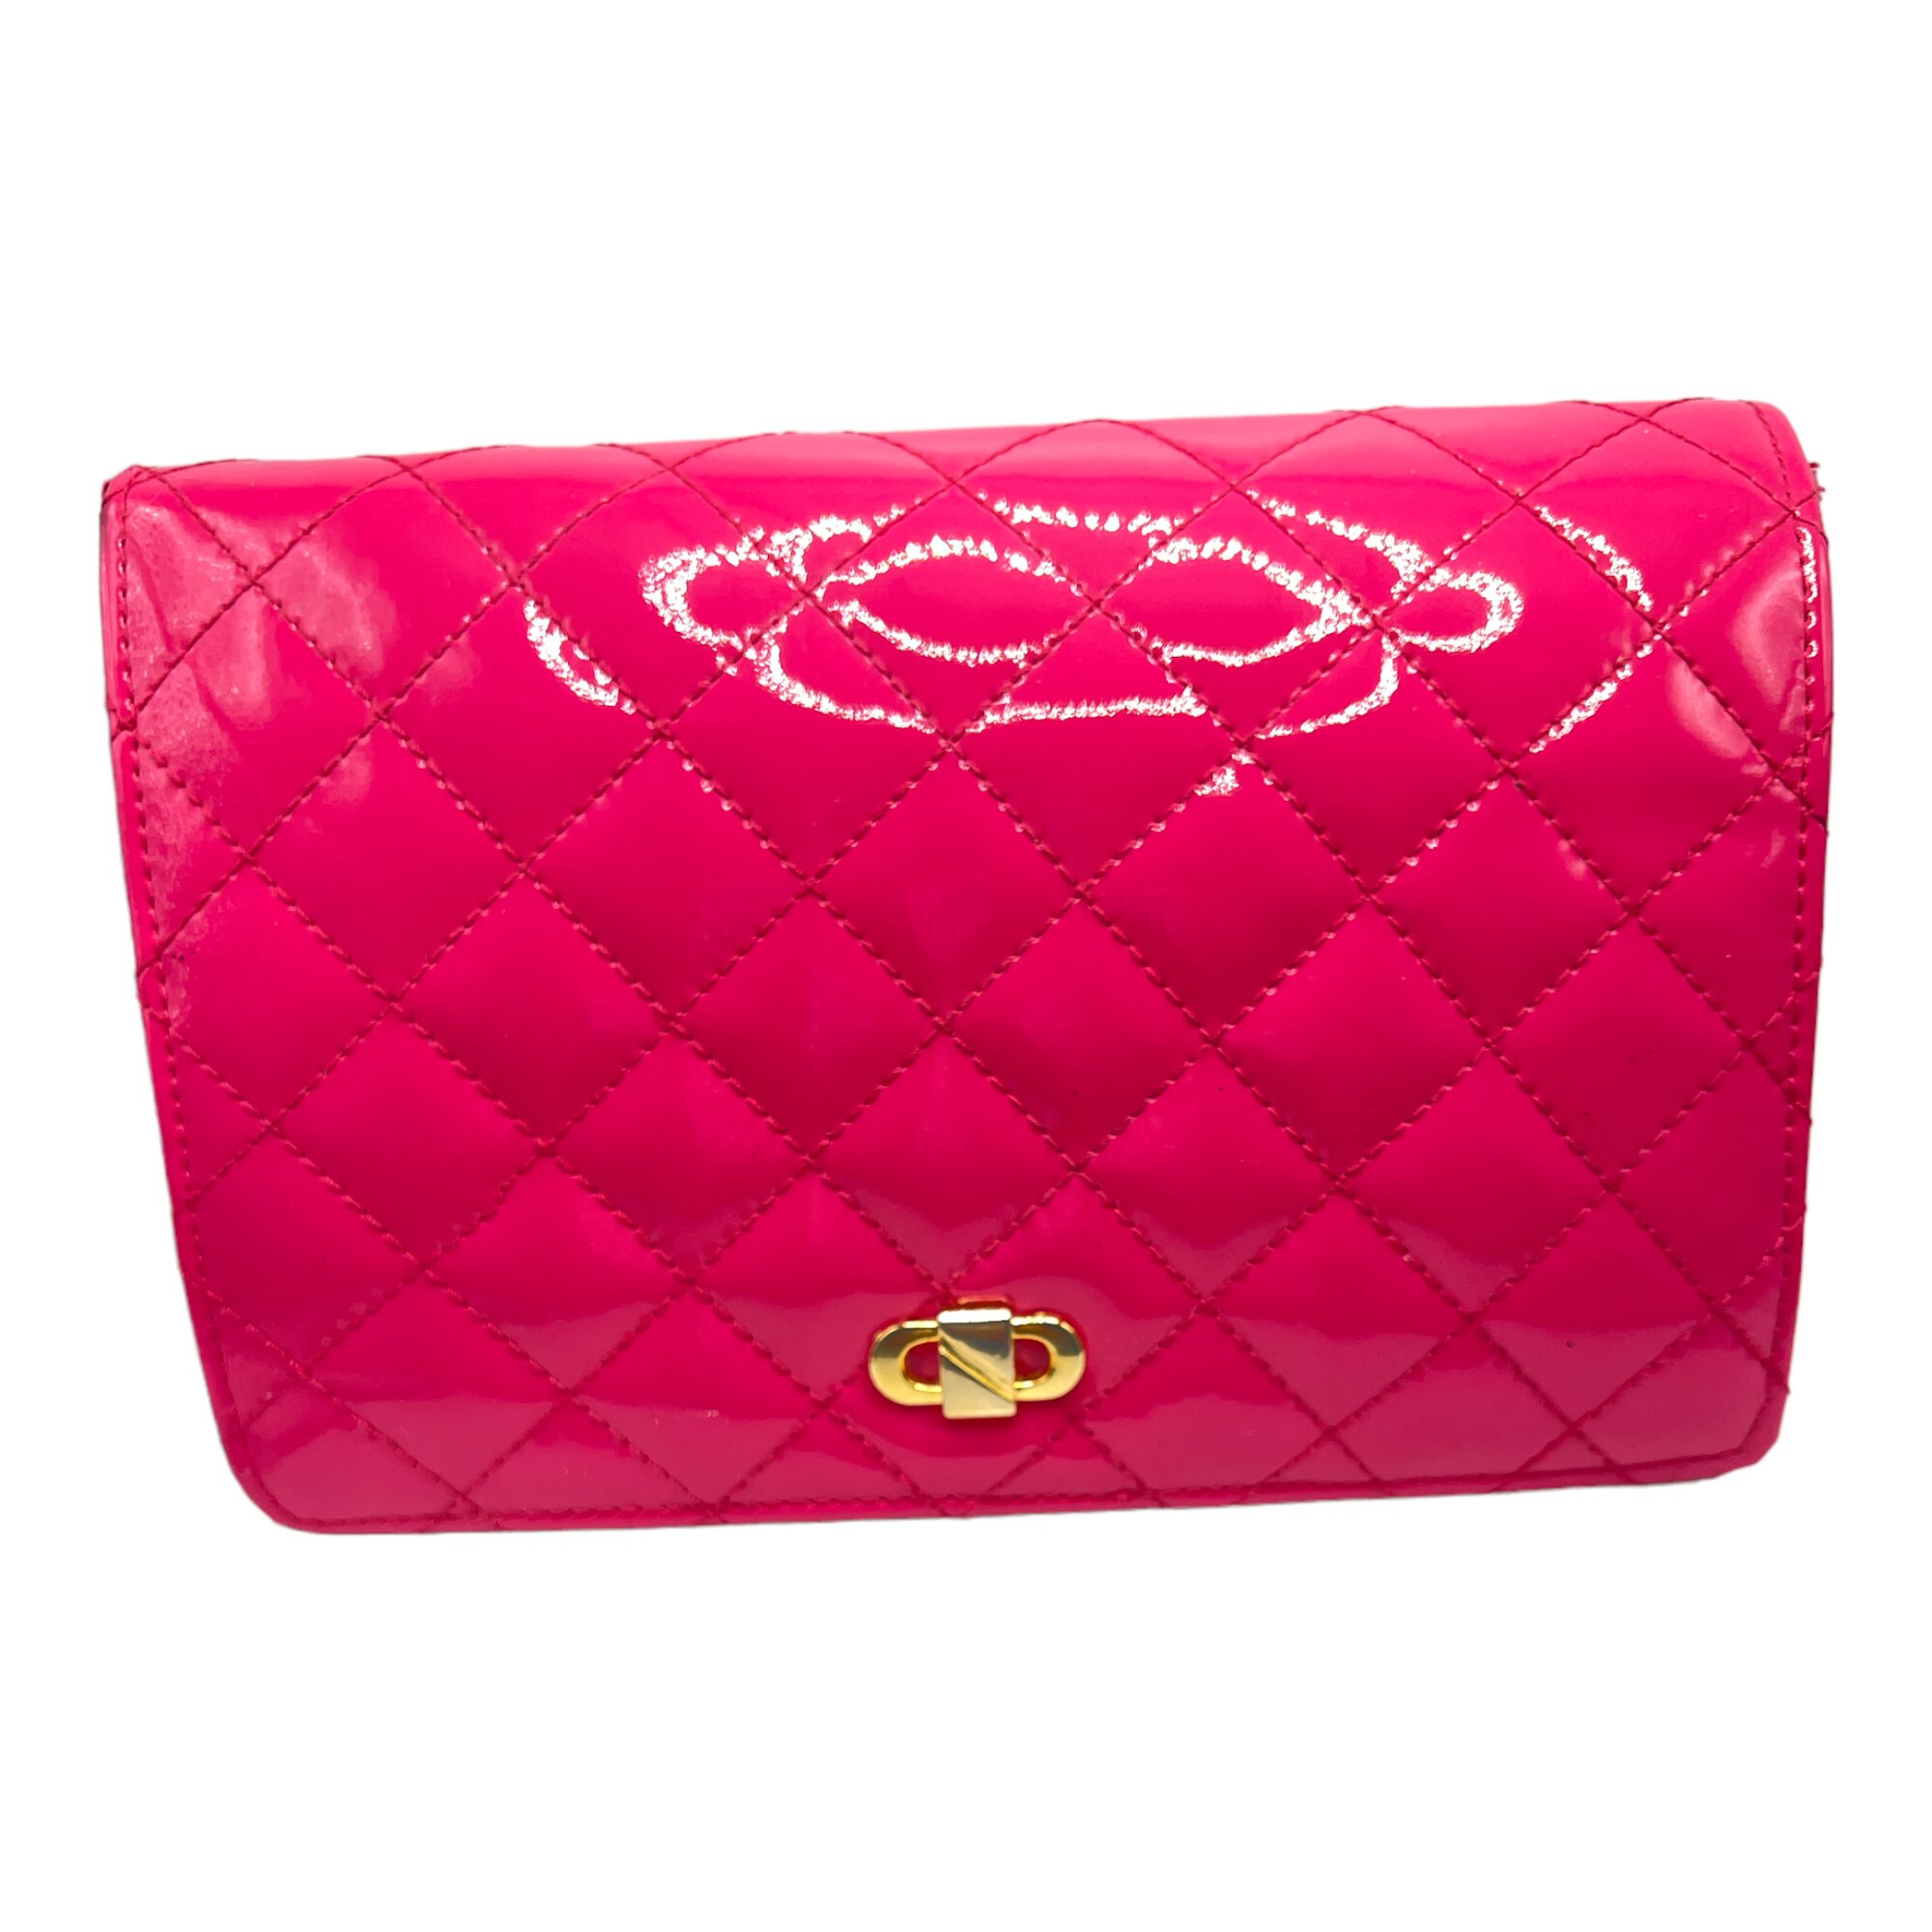 Quilted Hot Pink Small Purse w/ Gold Chain Straps